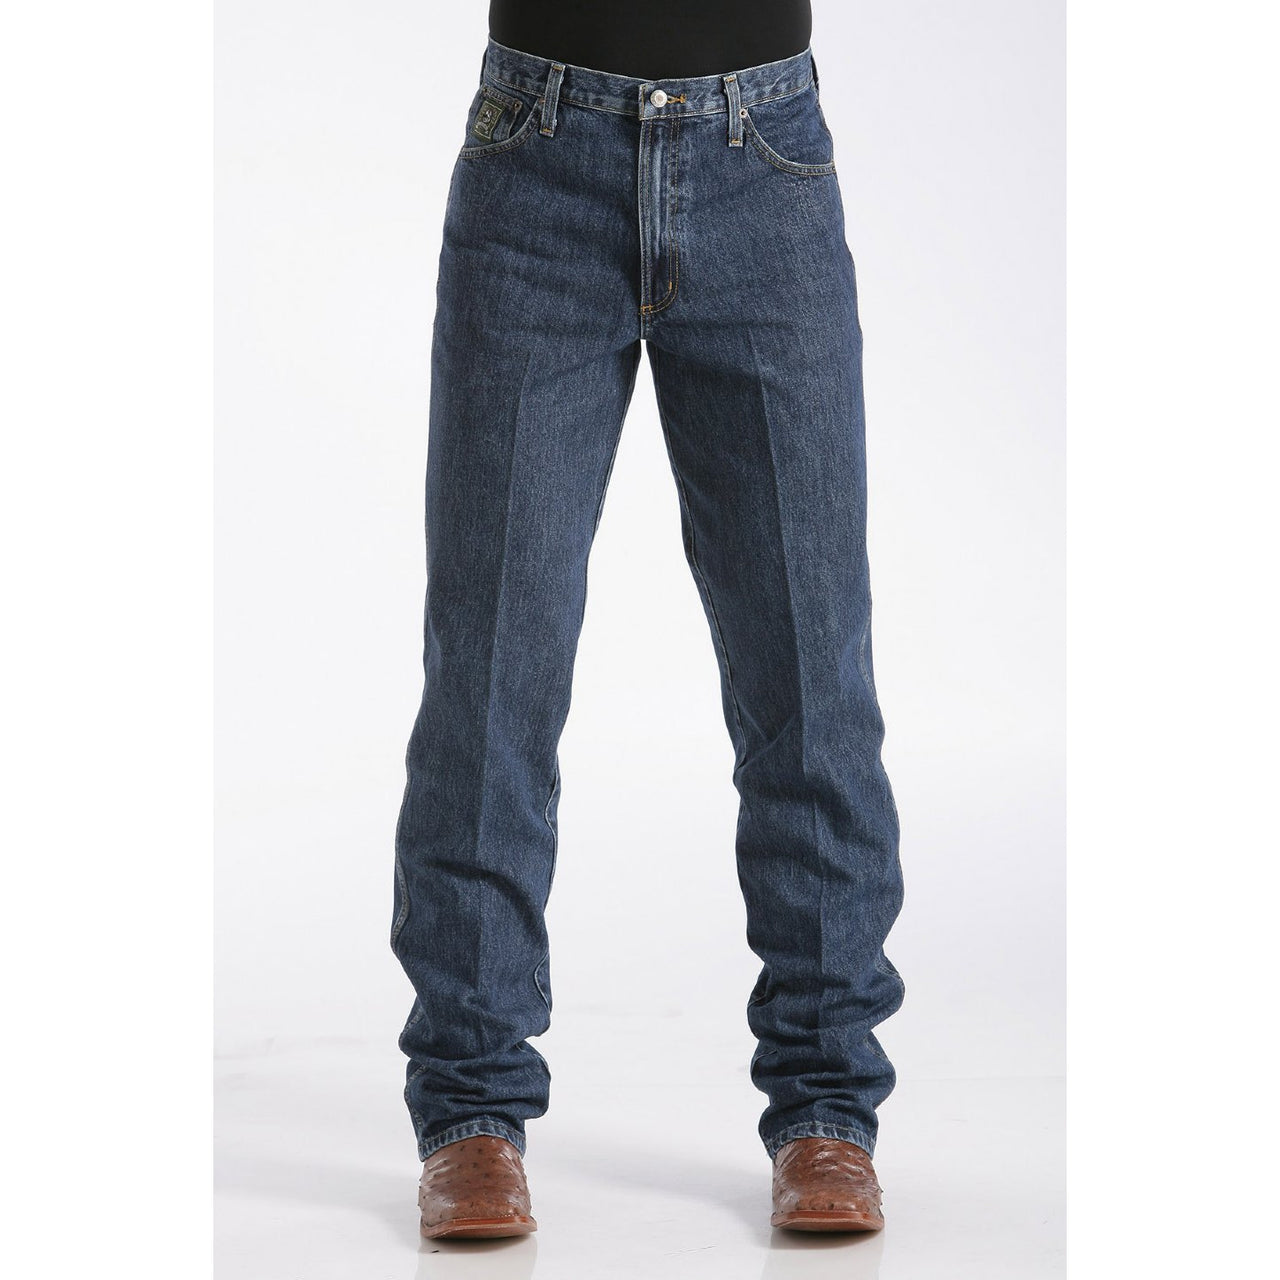 Cinch Men's Green Label Relaxed Tapered Jeans - Dark Stonewash